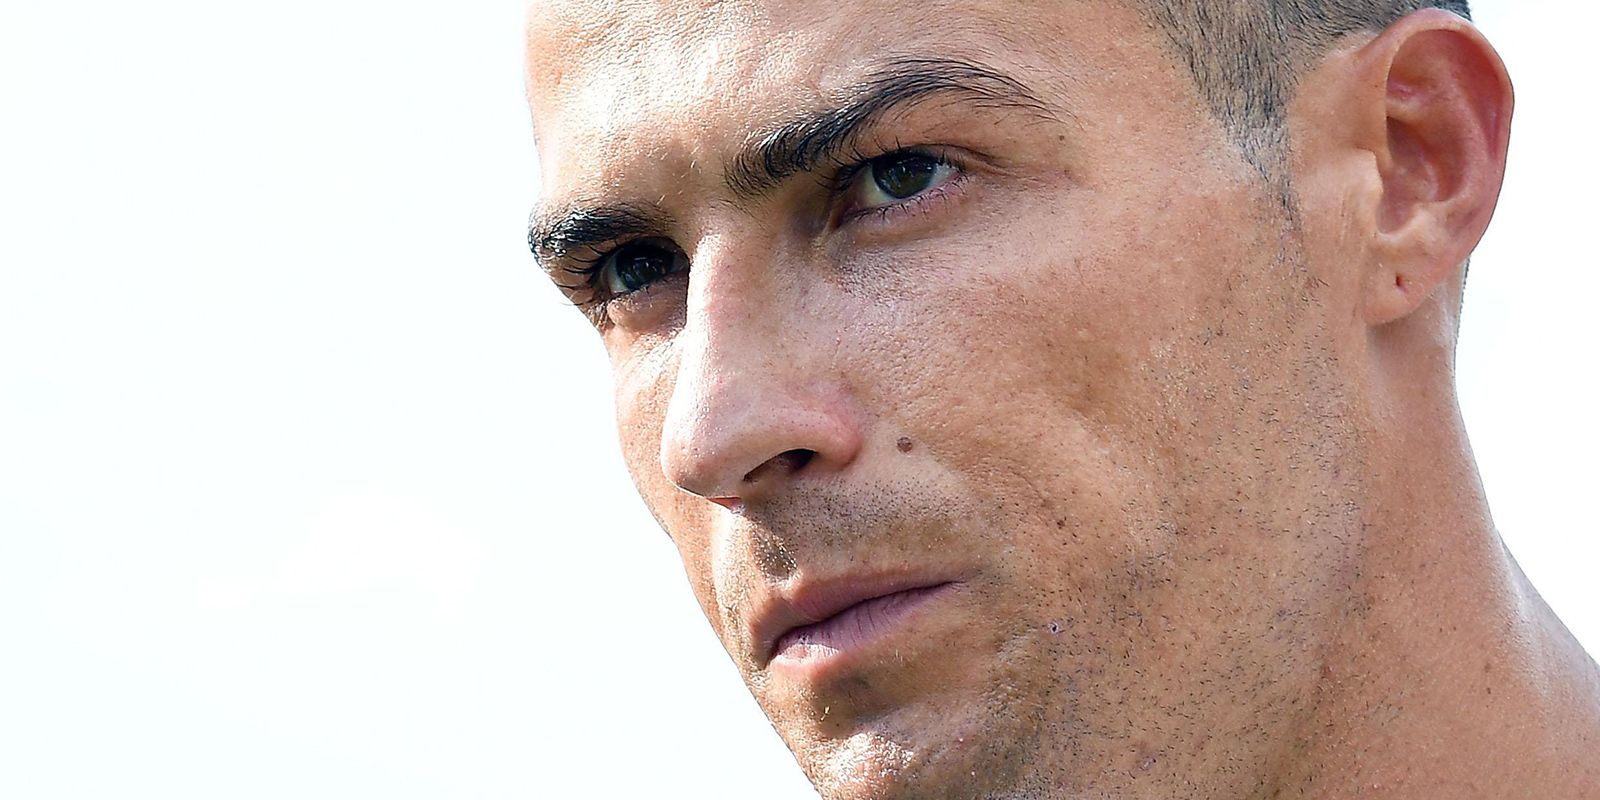 Cristiano ronaldo the boy who had a dream full movie Cristiano Ronaldo Is Probably The Most Gifted Athlete In The History Of The World So Why Is It So Hard To Like Him It S Complicated Writes Brian Phillips